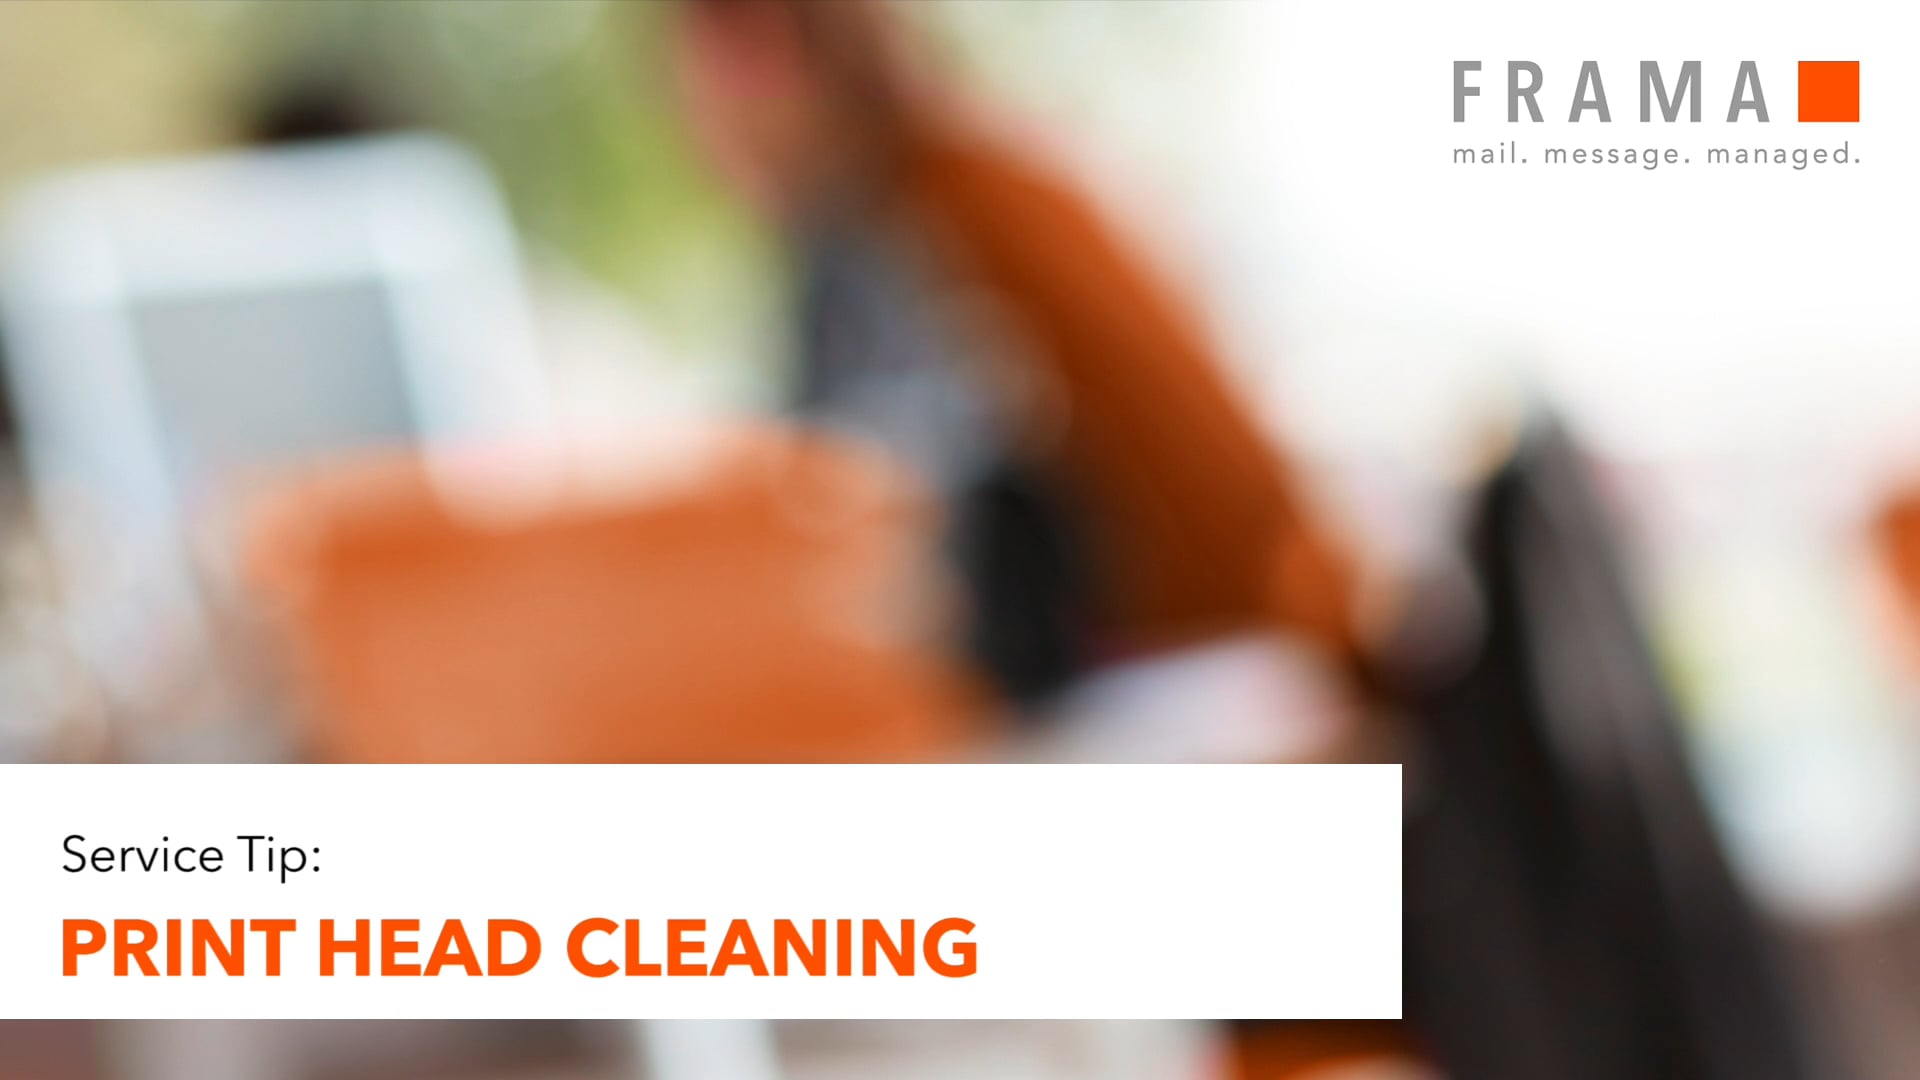 Frama Service Tip: Print Head cleaning